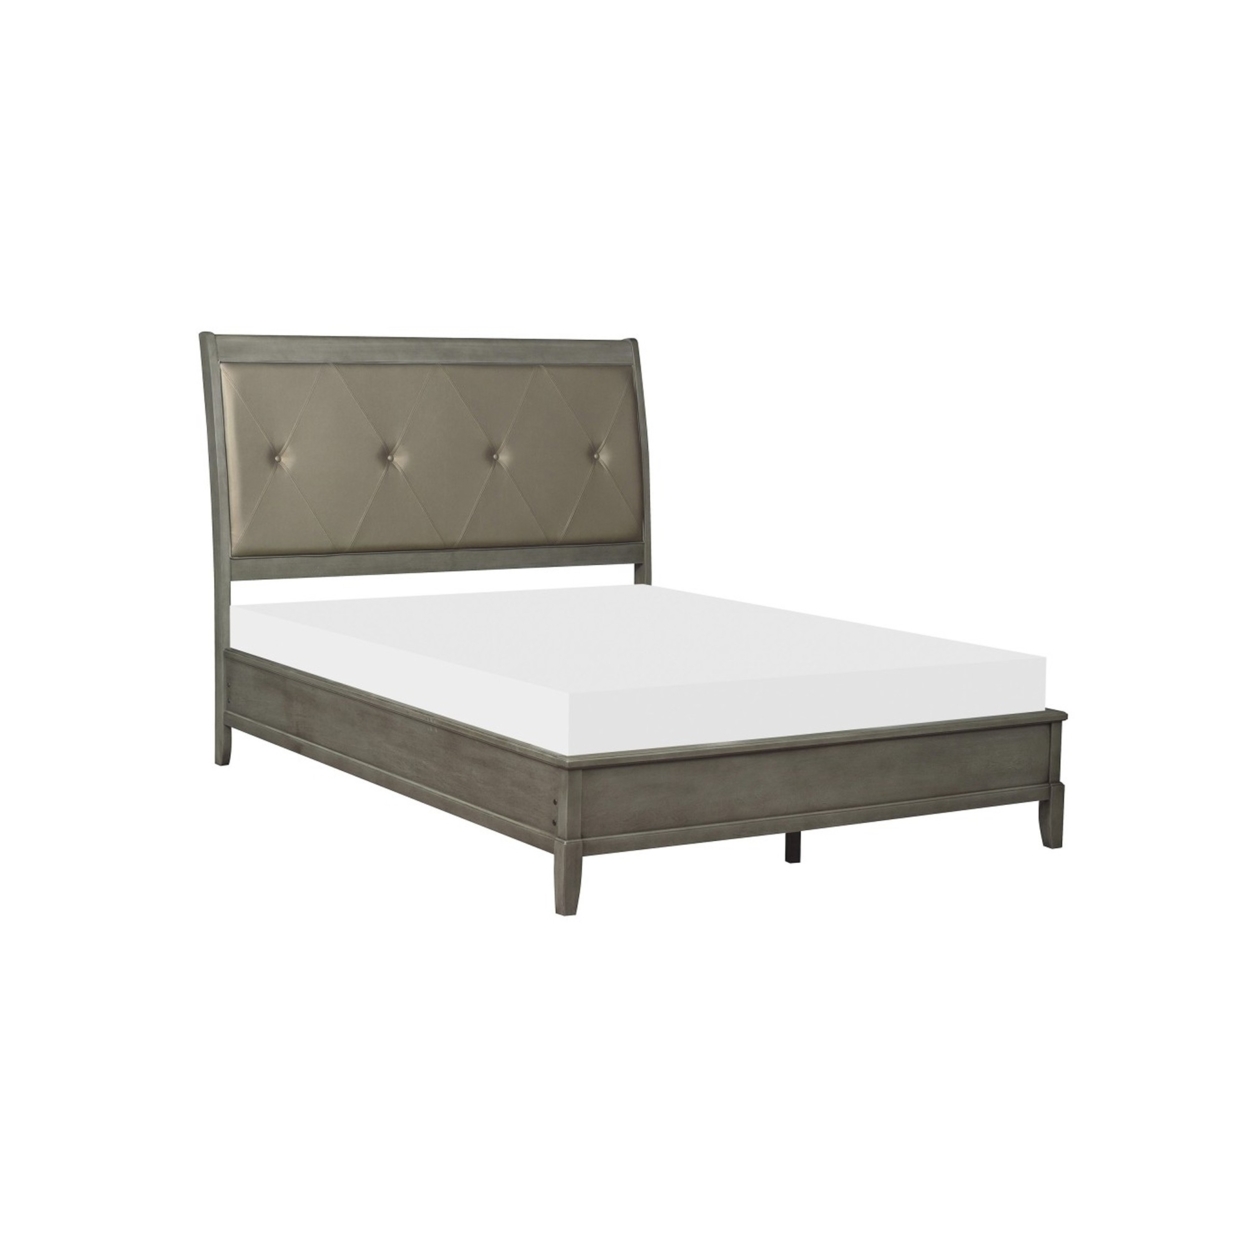 Hadly Classic Queen Sleigh Bed, Button Tufted Headboard, Gray Faux Leather- Saltoro Sherpi